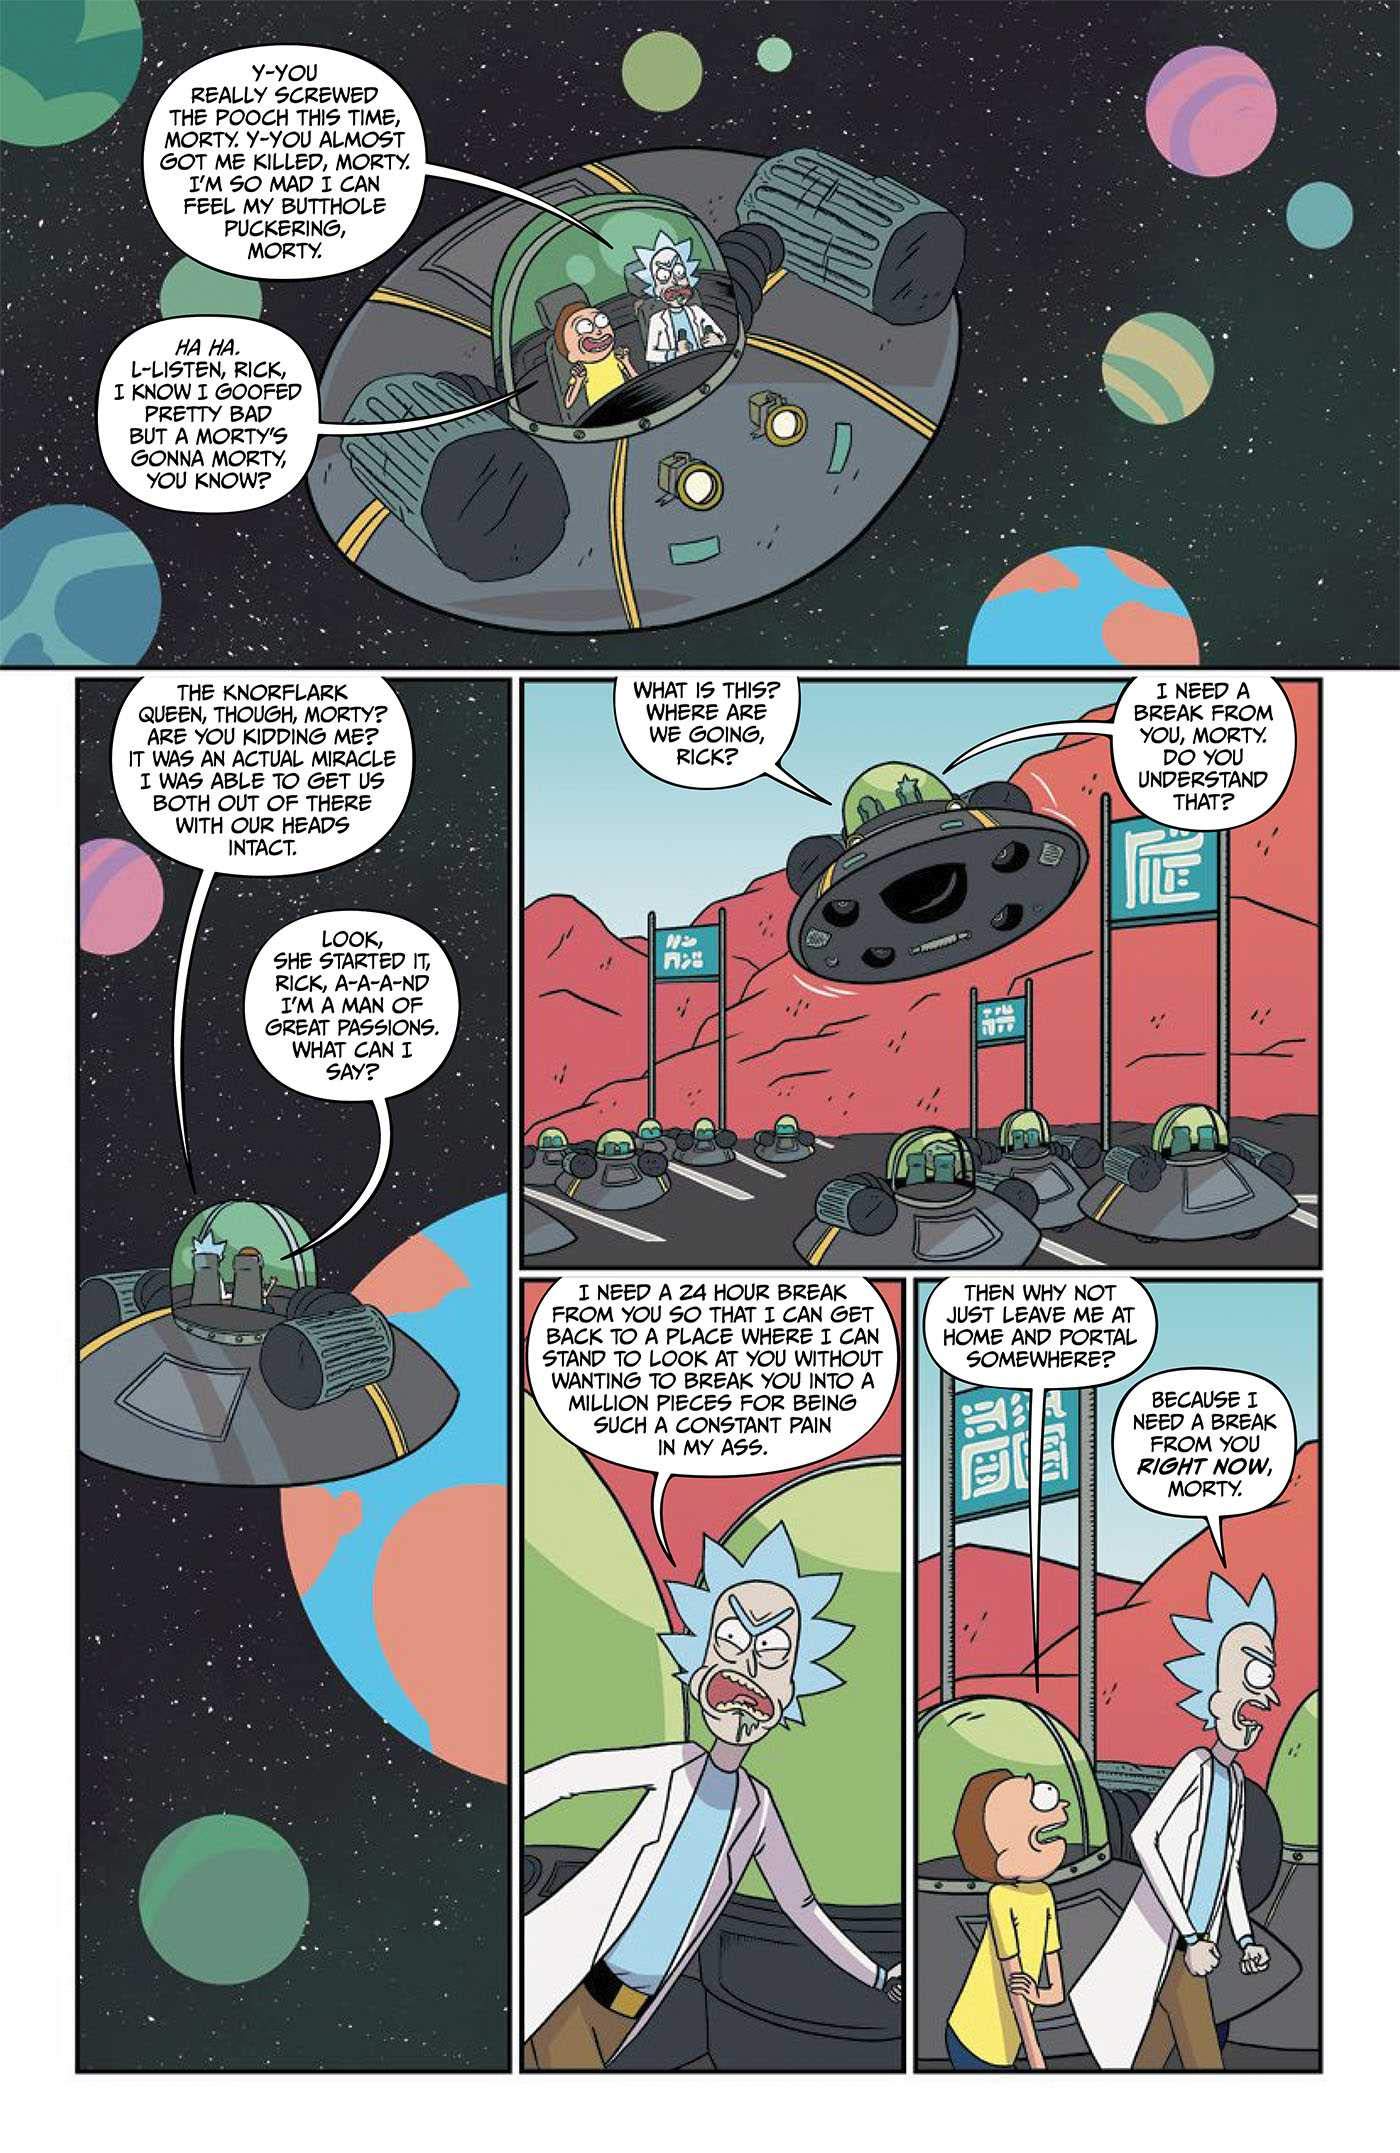 Rick and Morty Book Seven: Deluxe Edition (7)